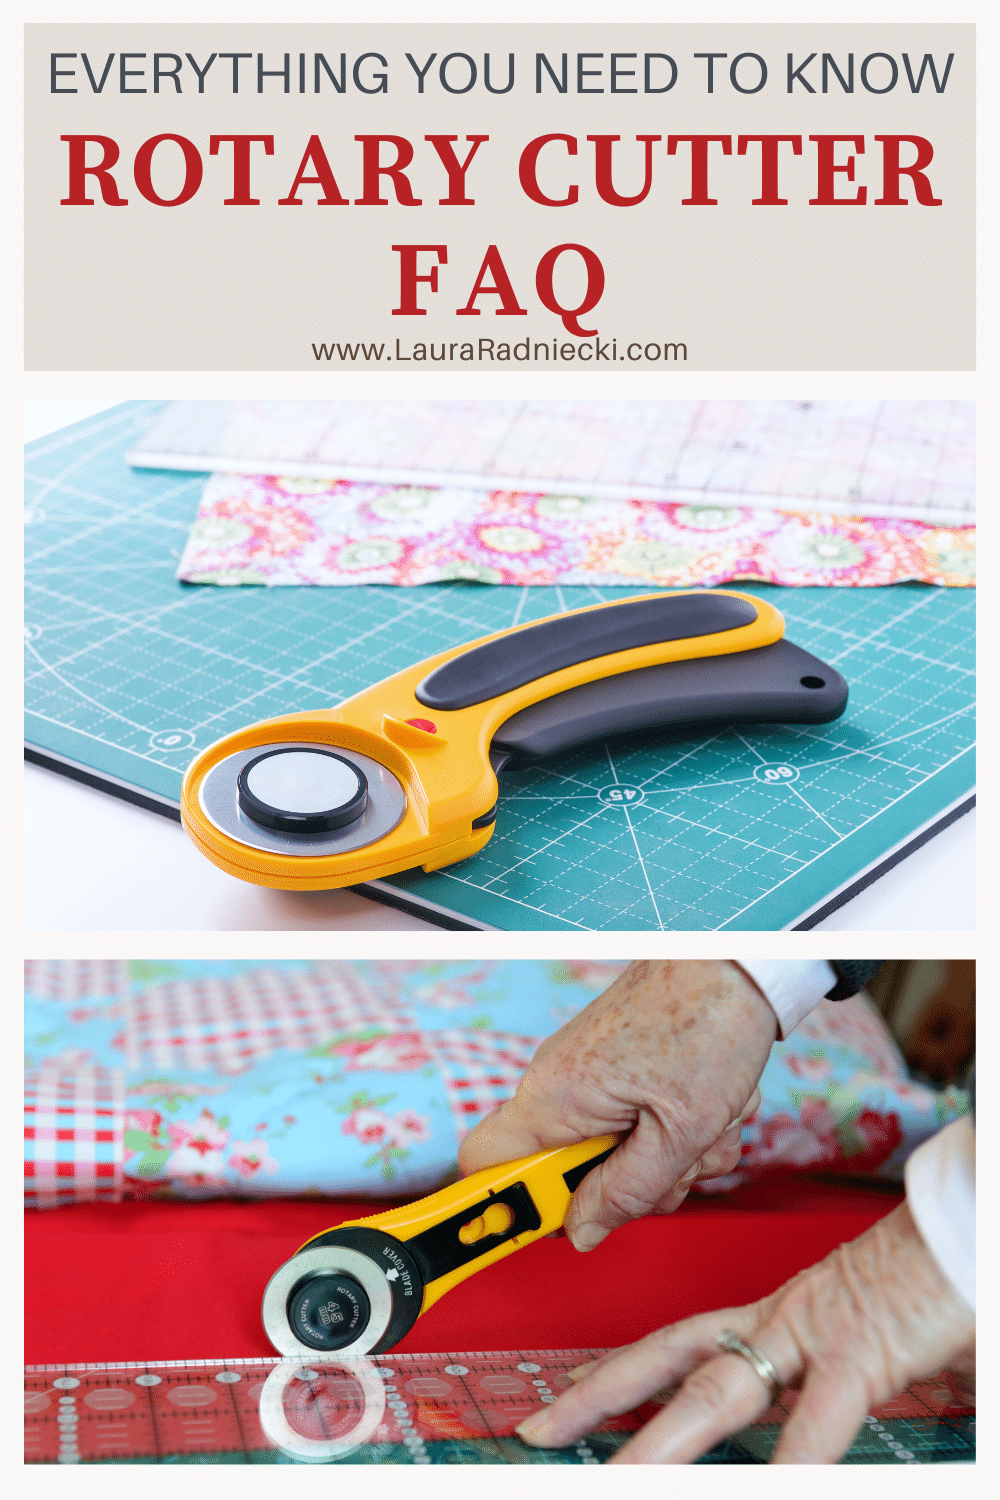 Rotary Cutter FAQ: Everything You Need to Know